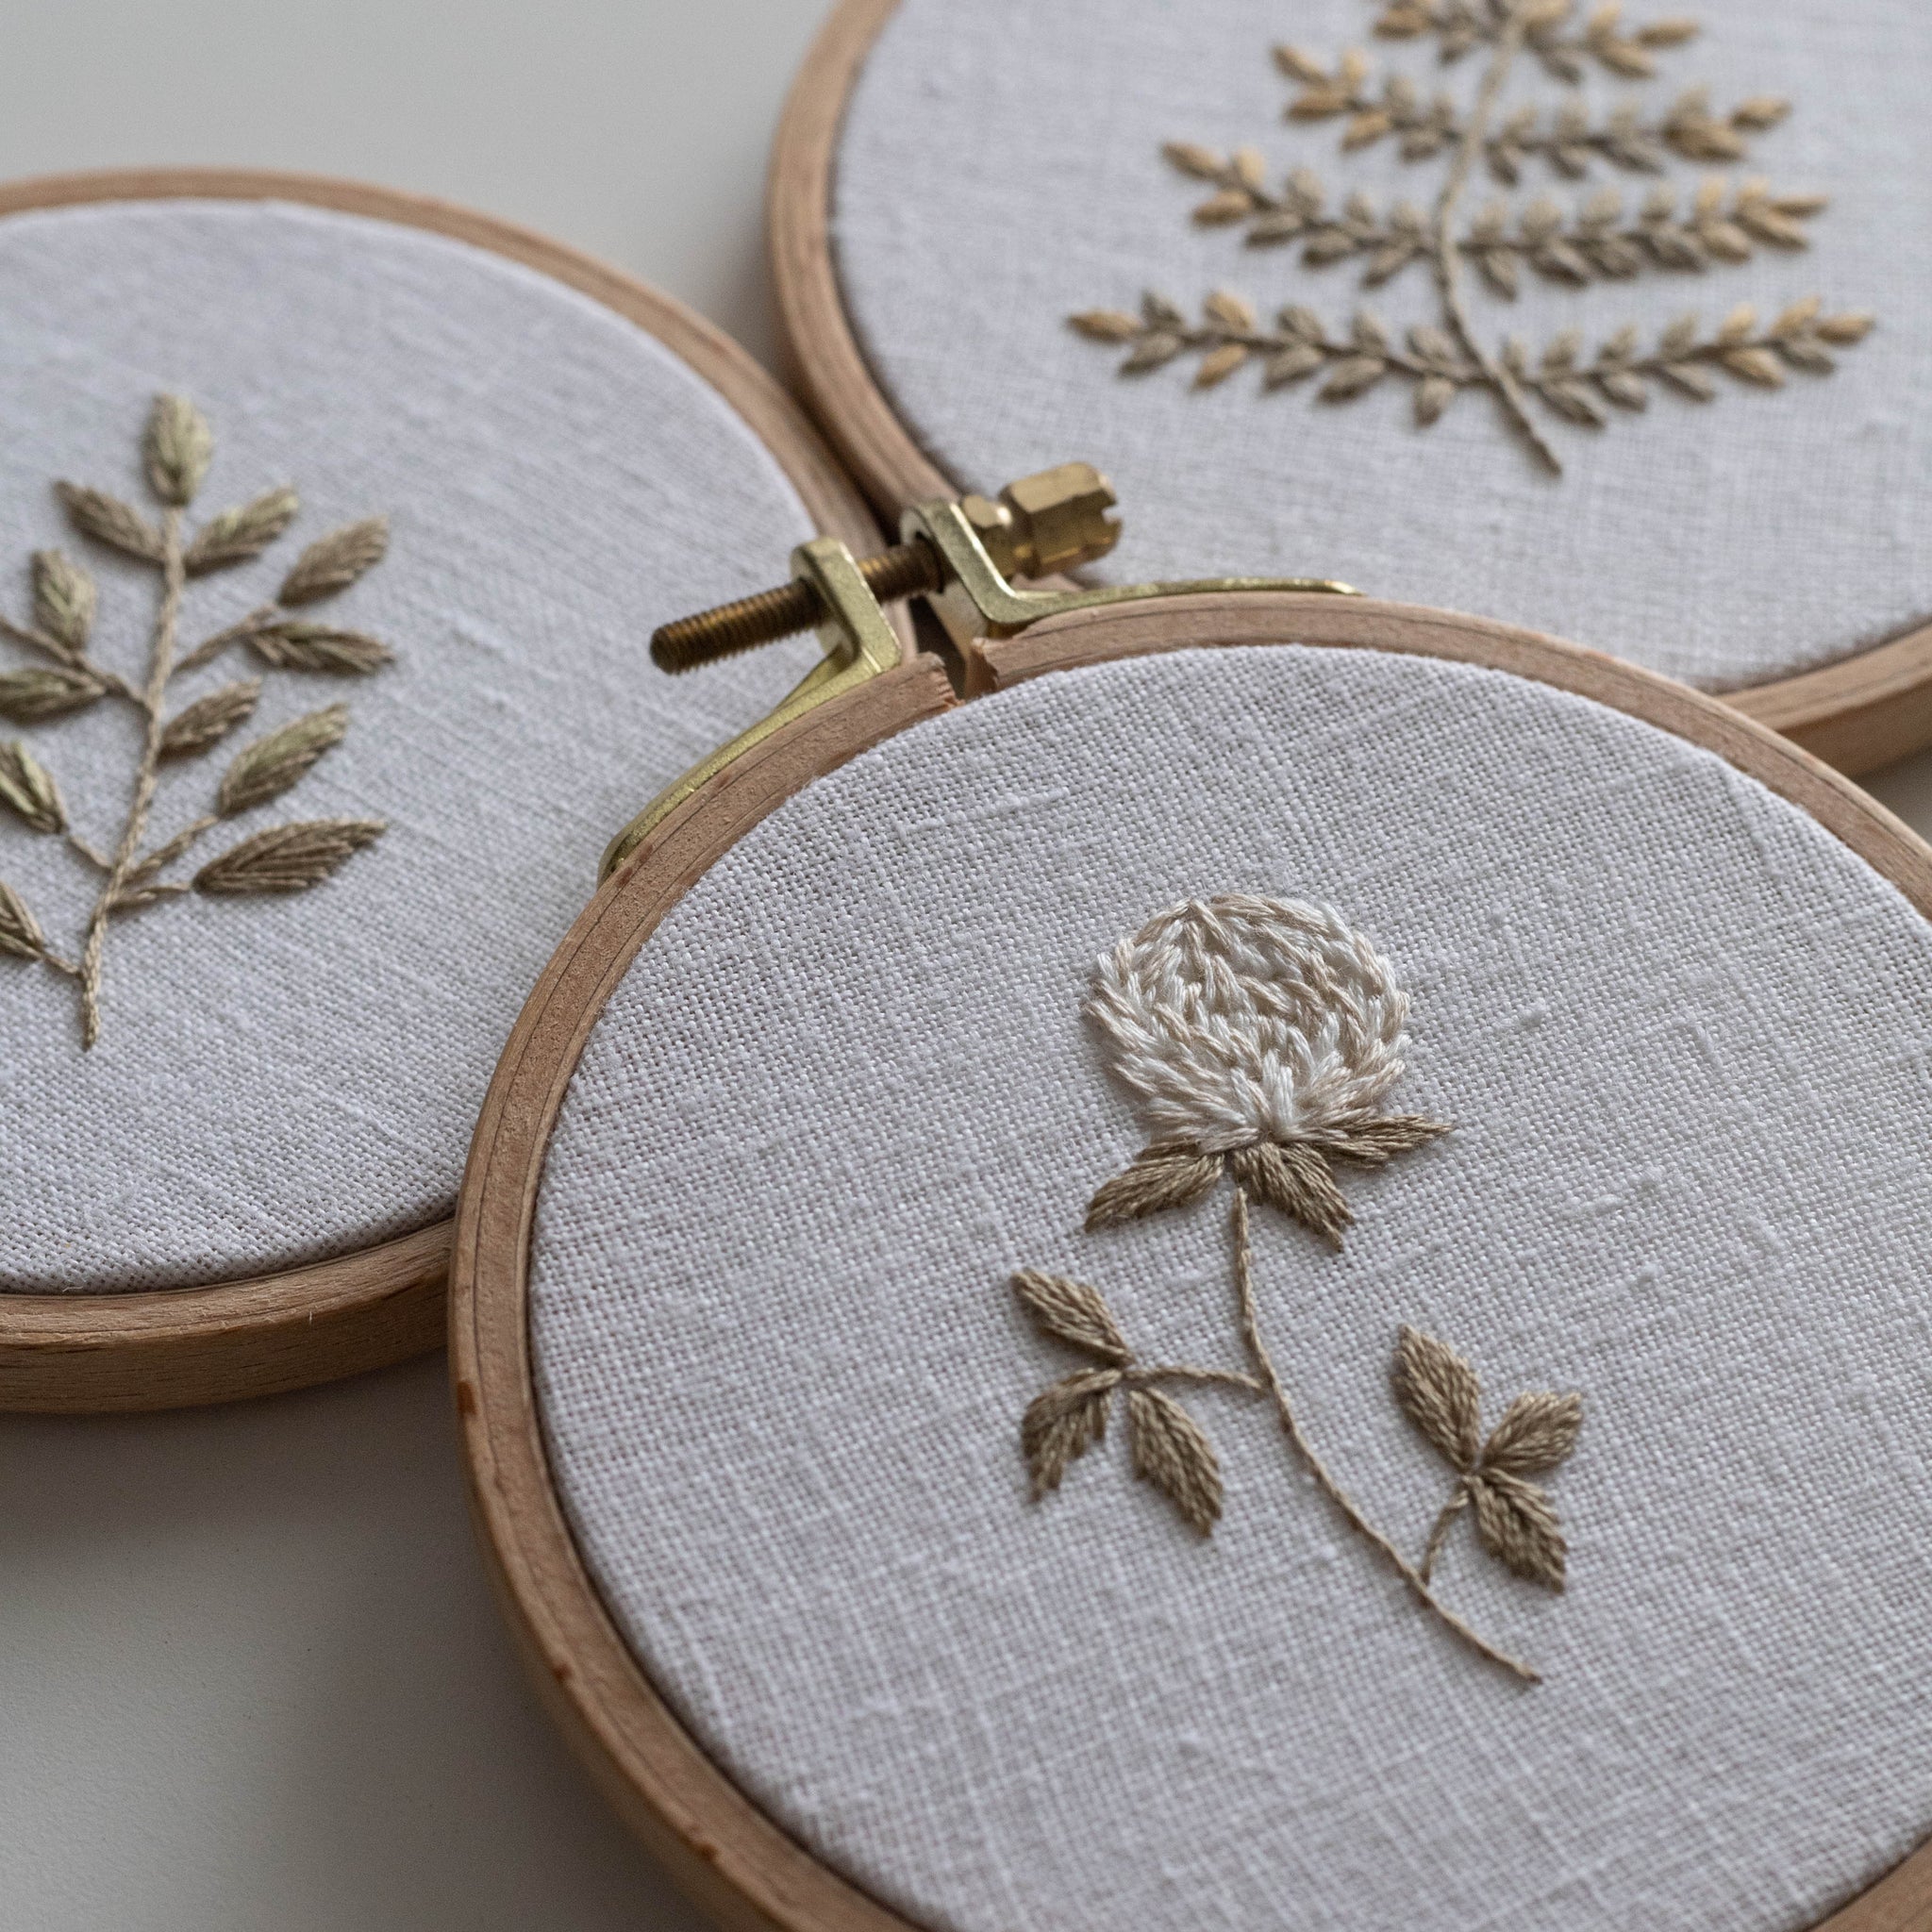 Embroidery Kit - Stick and Stitch Embroidery Patterns - Floral